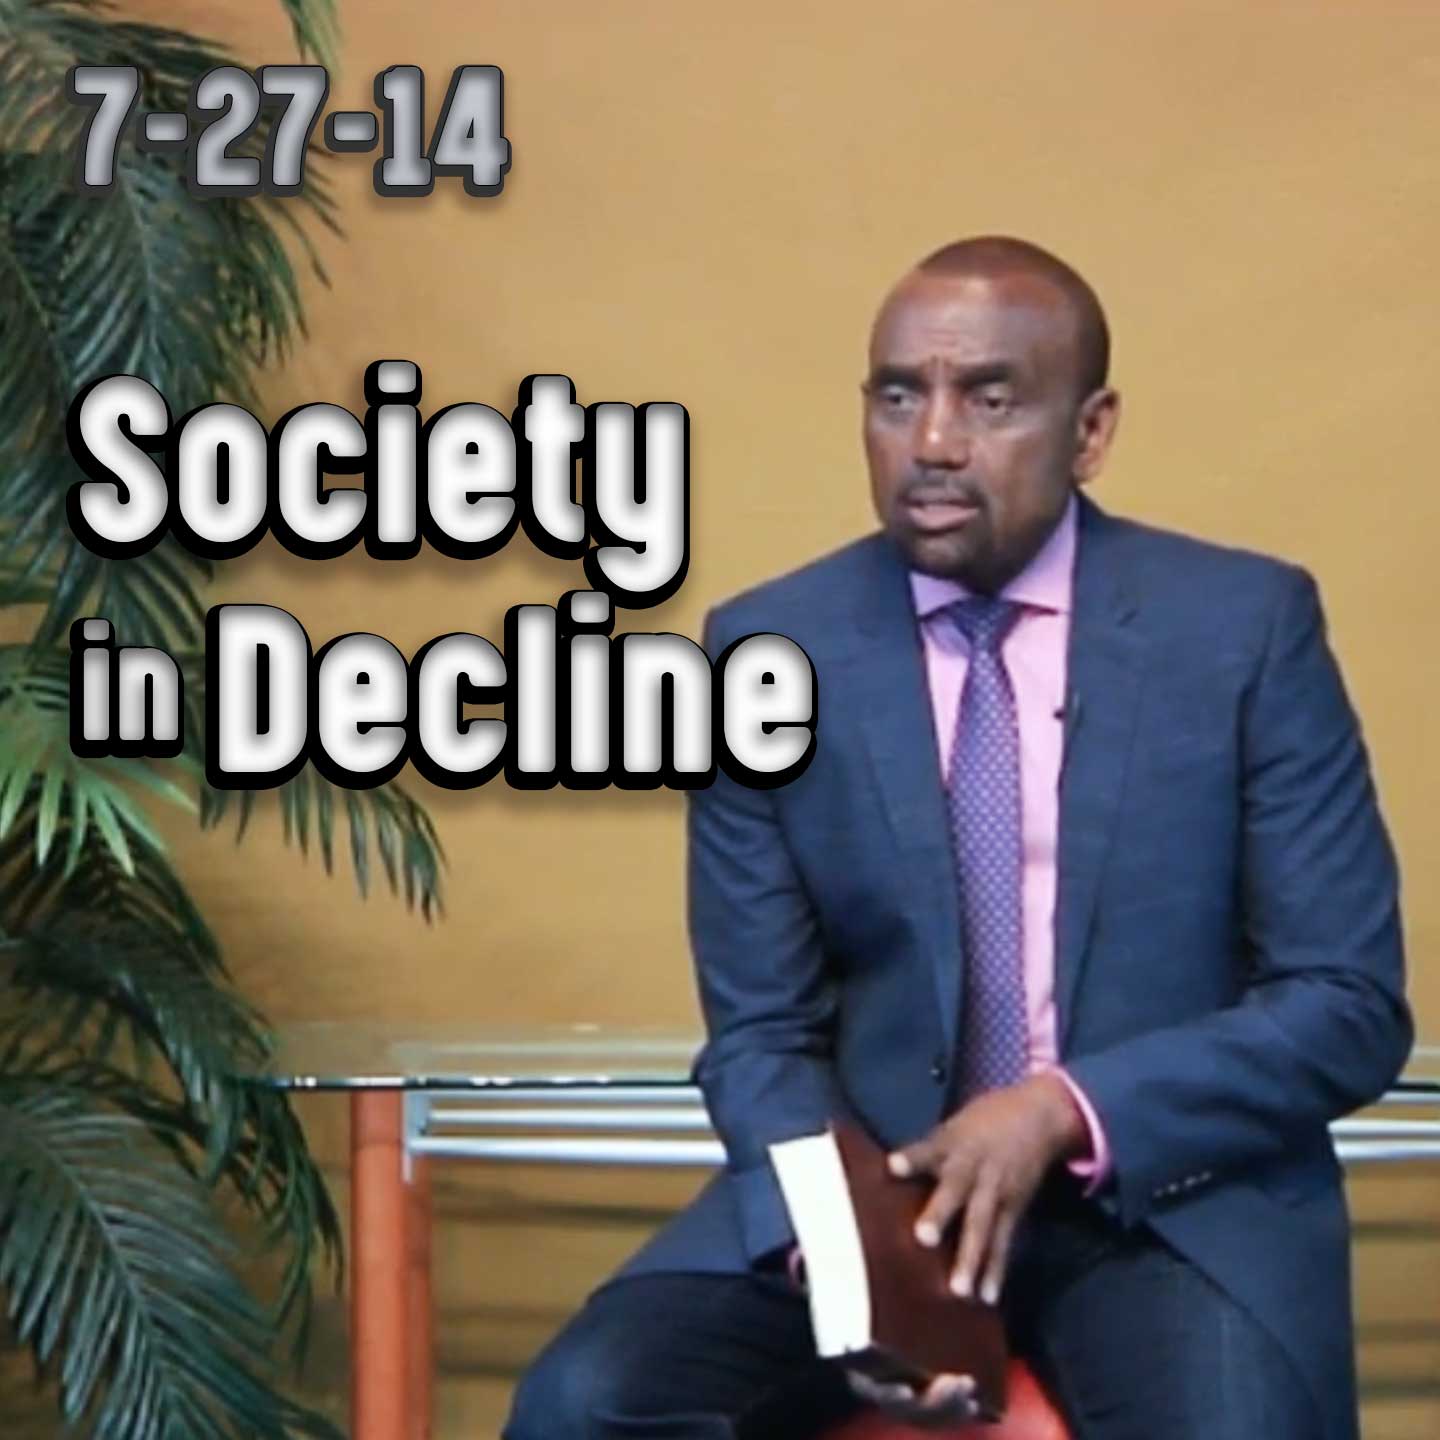 Do You Believe in the End Times? Society in Decline | Archive Service 7/27/14